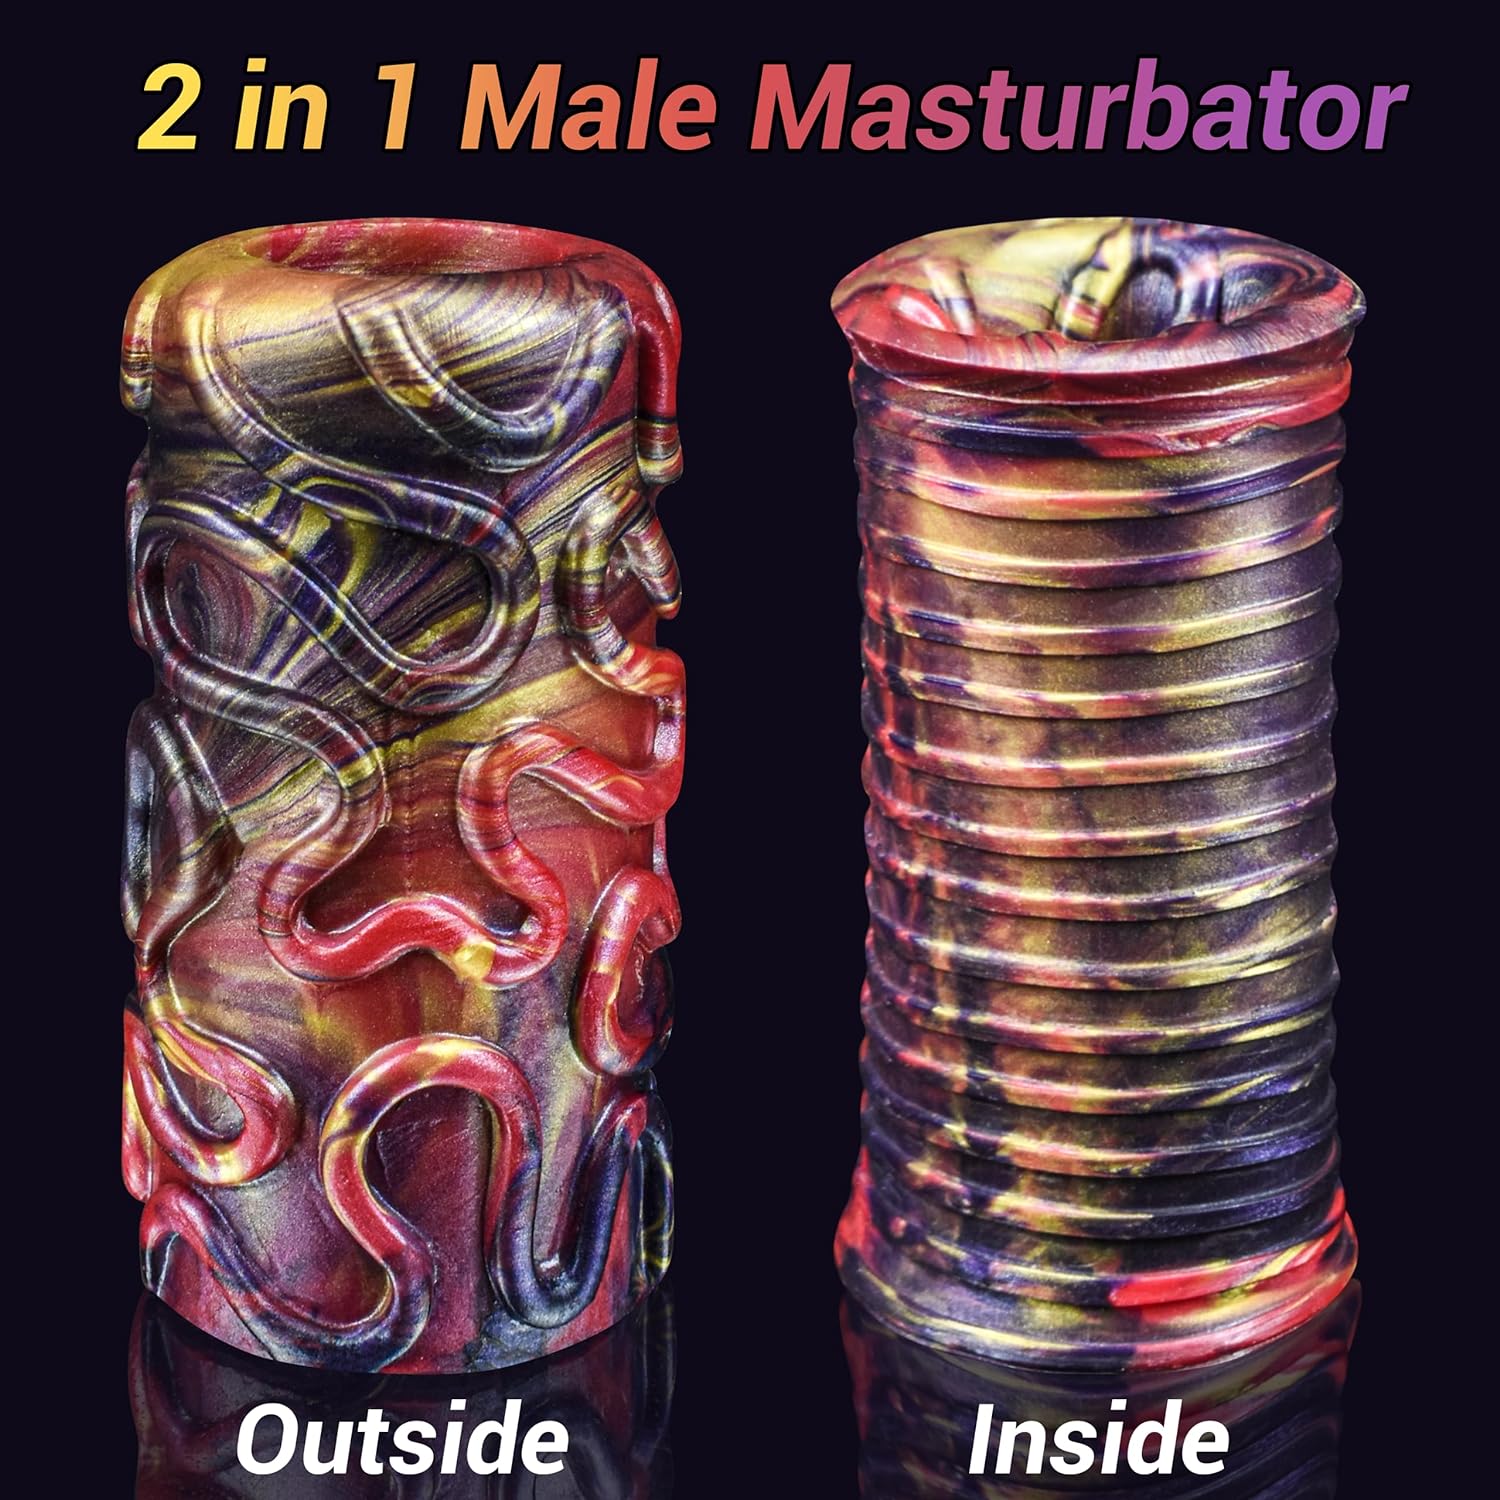 Nocturne 2 in 1 Pocket Pussy Male Masturbator With Open-ended Design - Laphwing